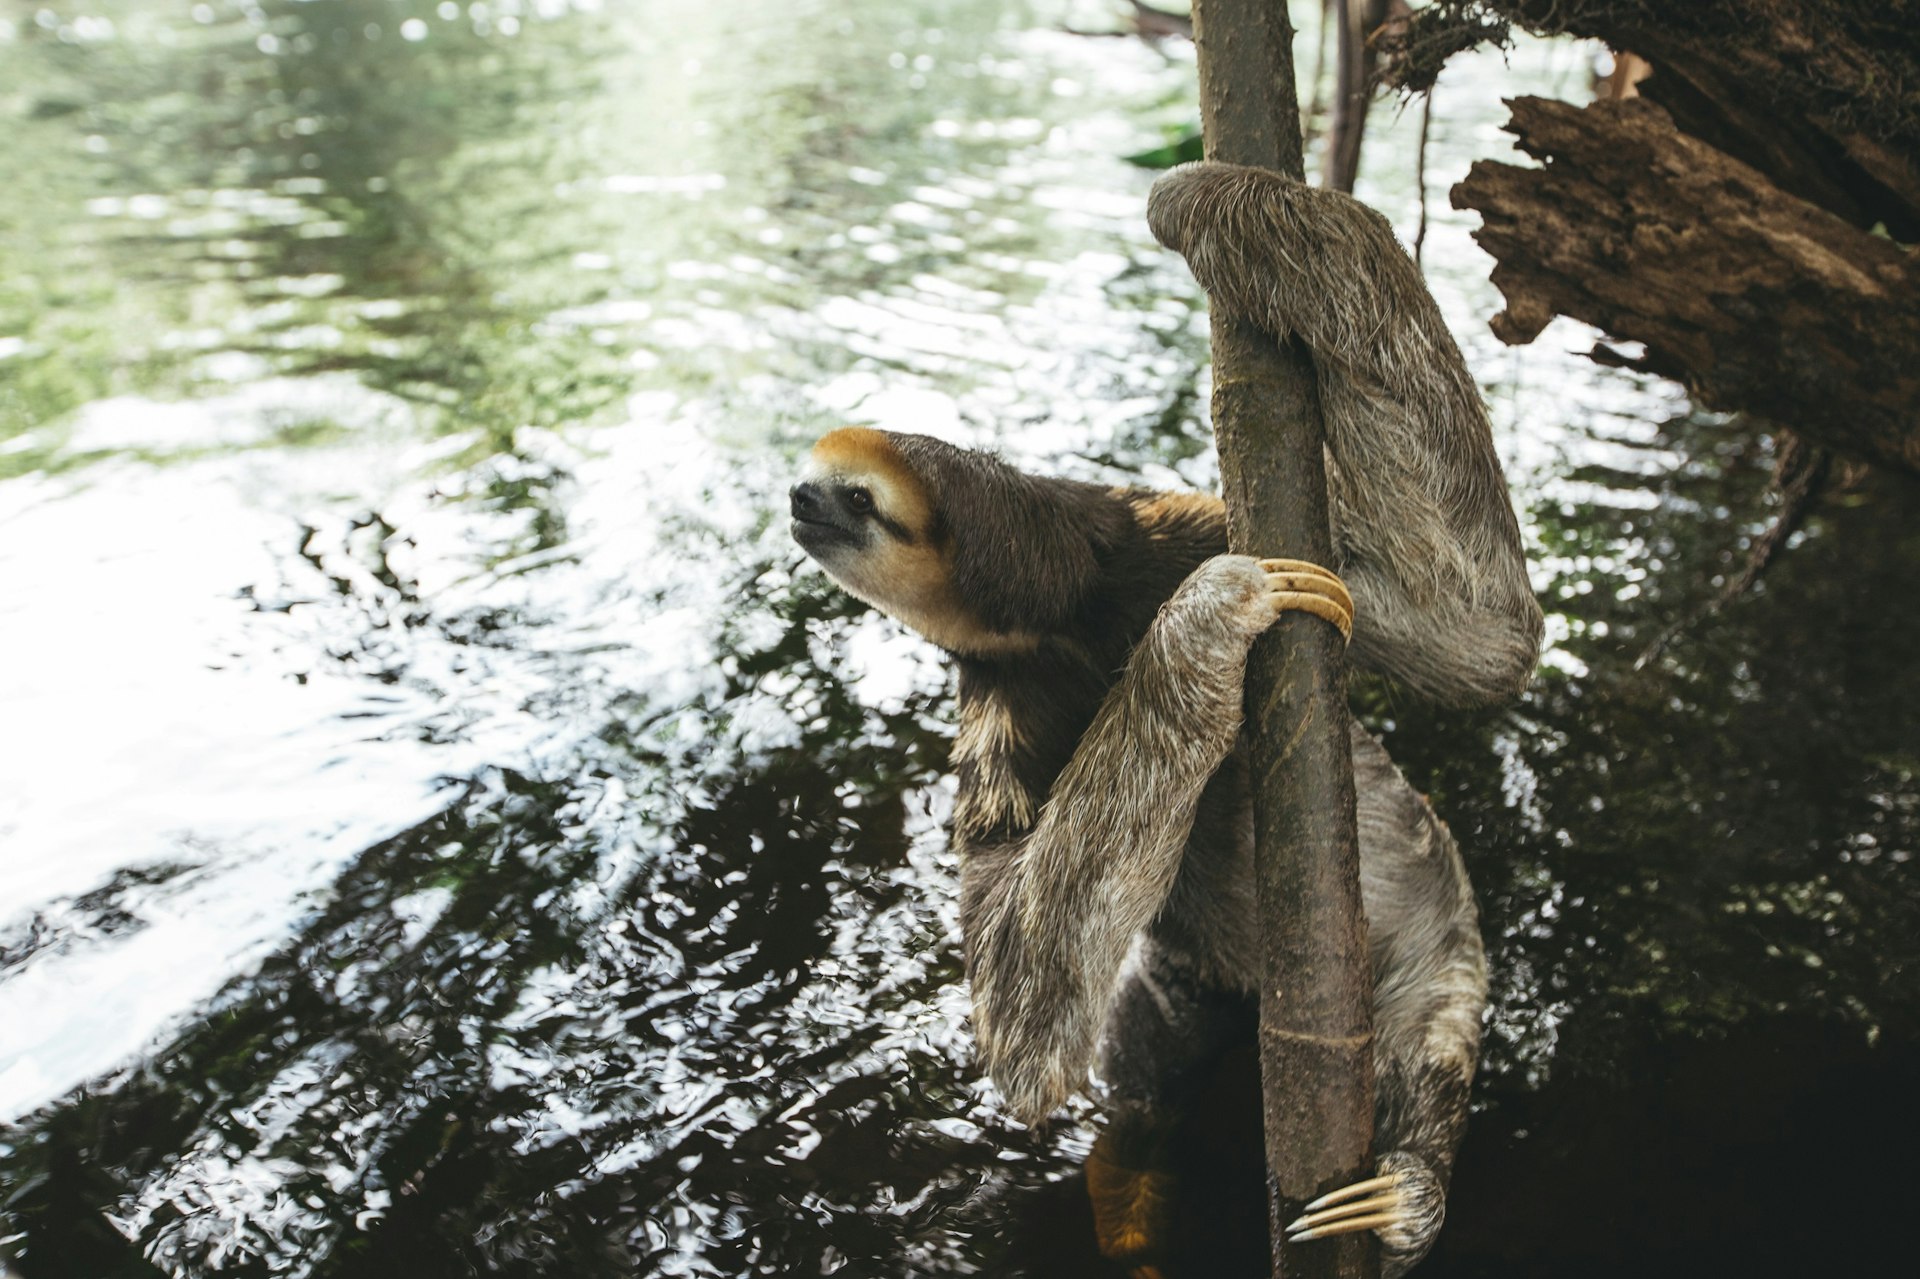 Sloth hanging on a wooden branch over the river.